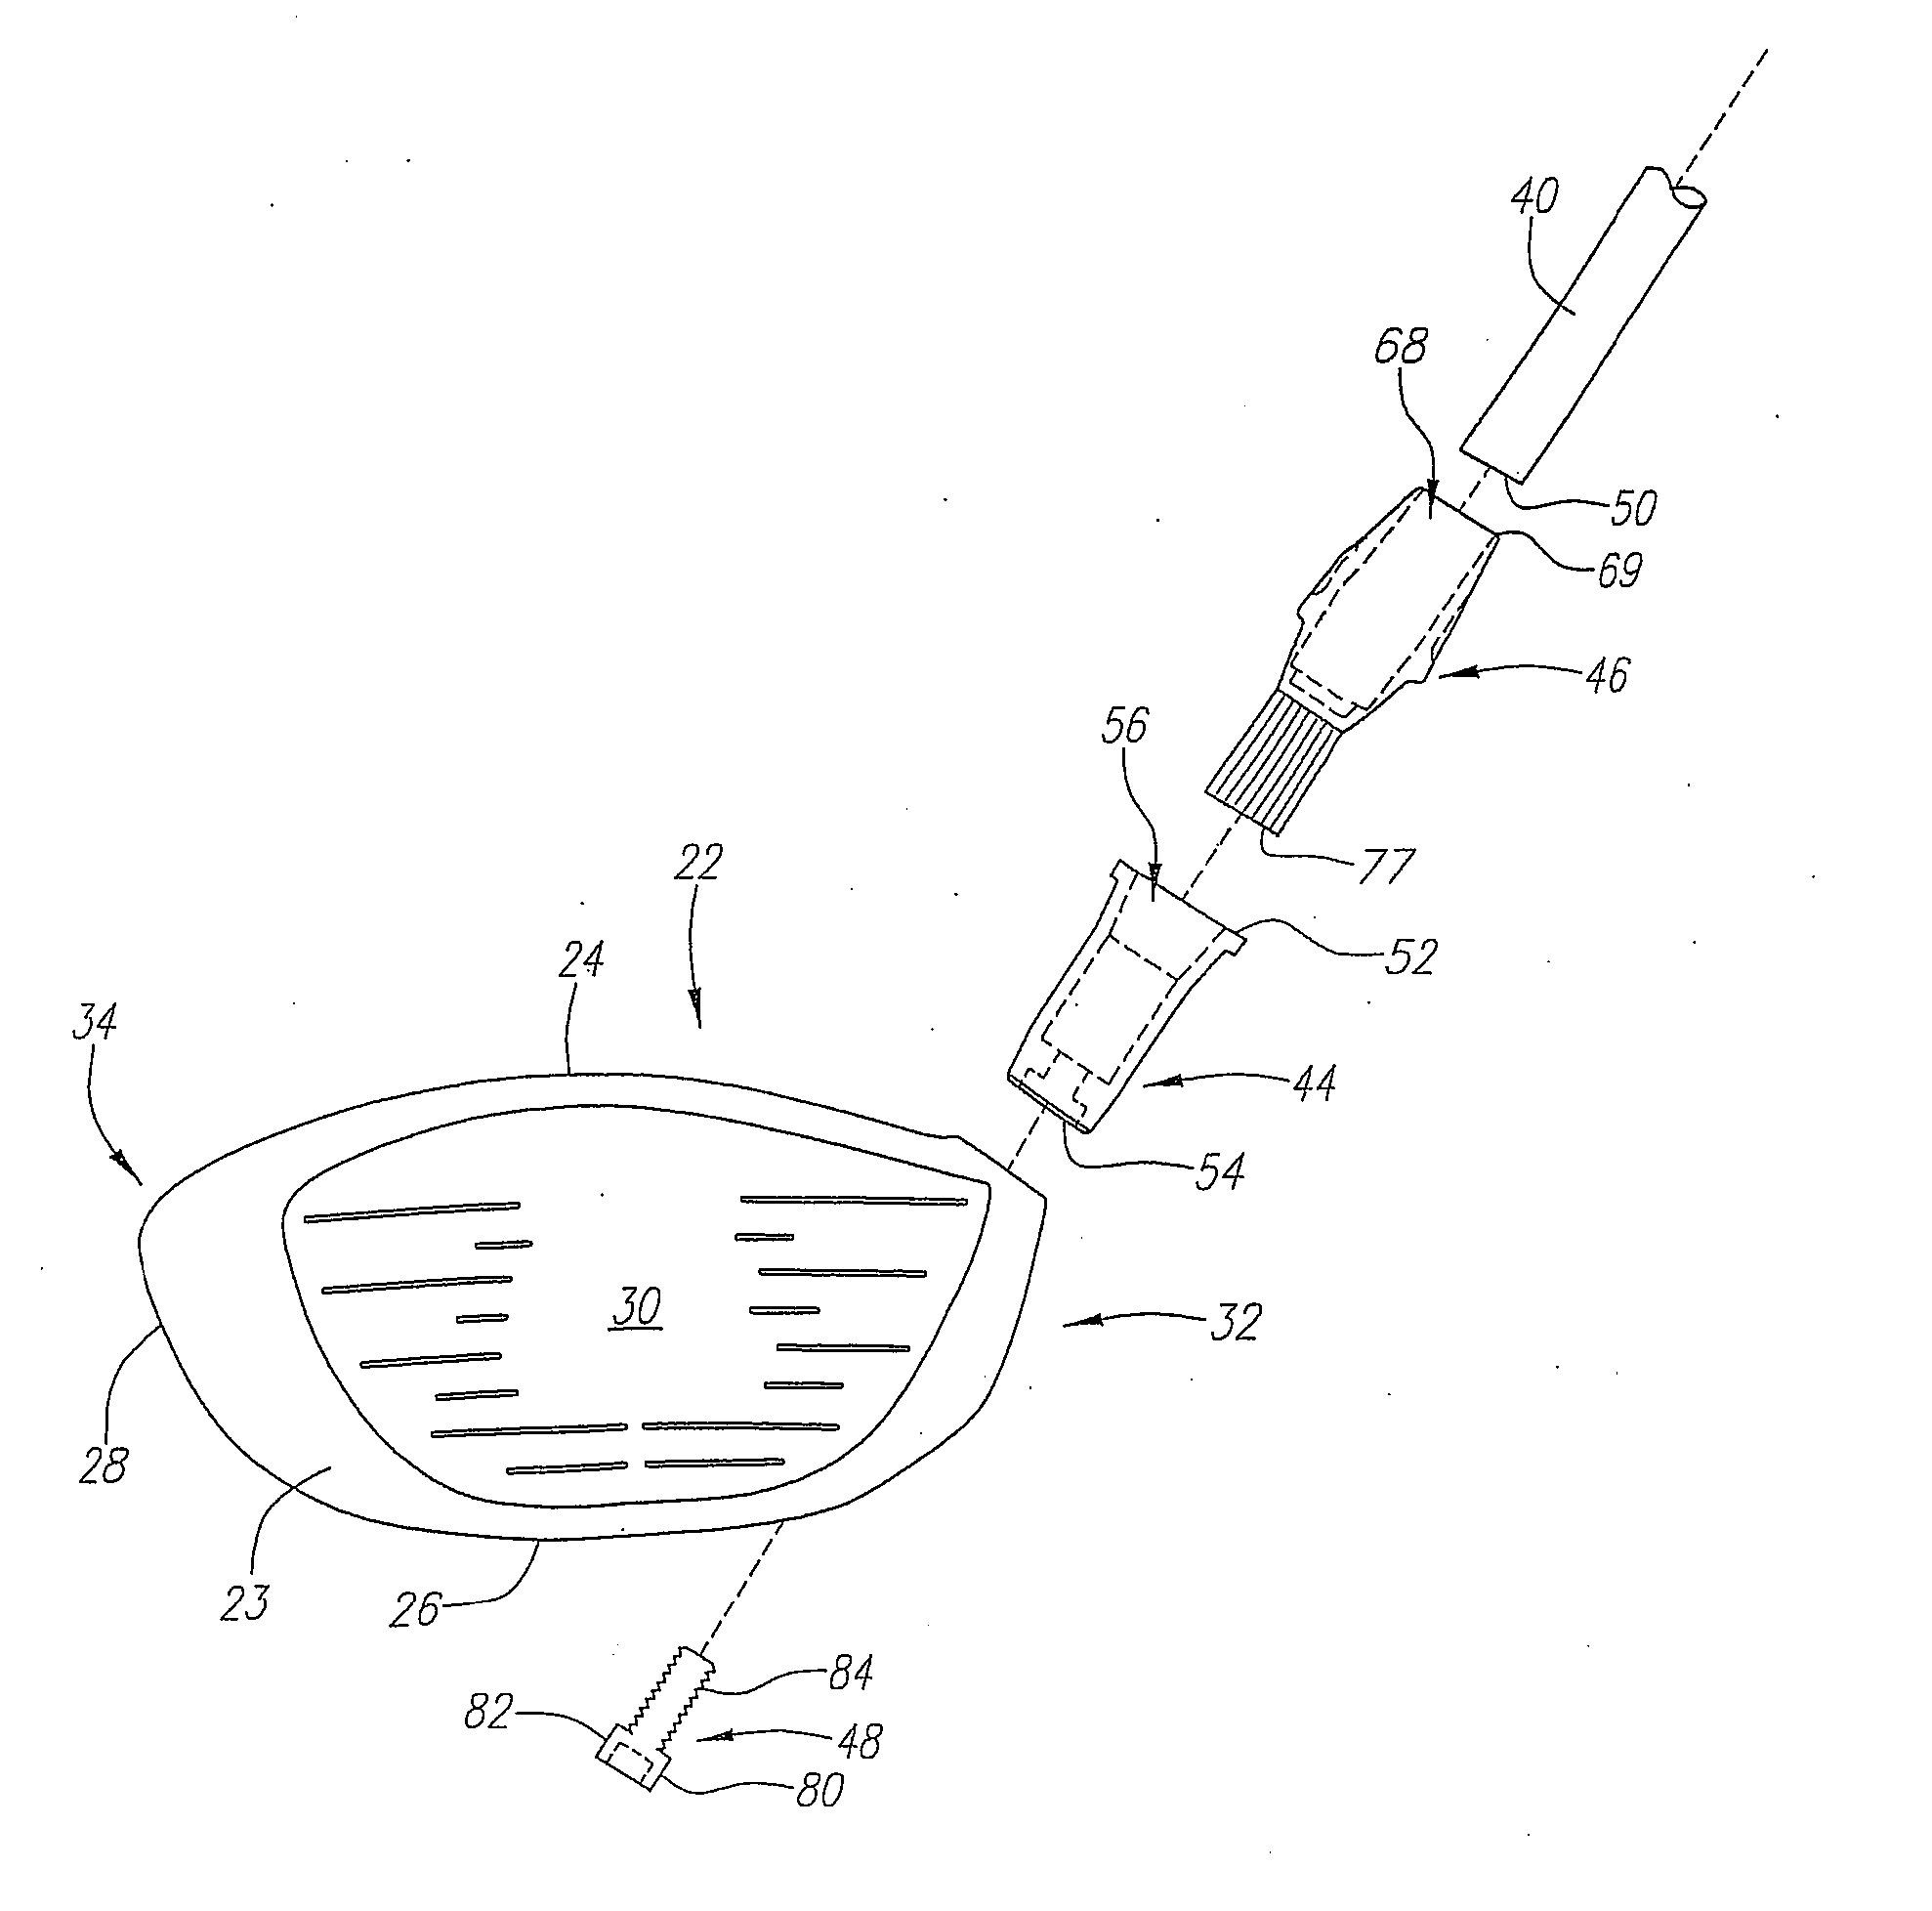 Iron-Type Golf Club with Interchangeable Head-Shaft Connection